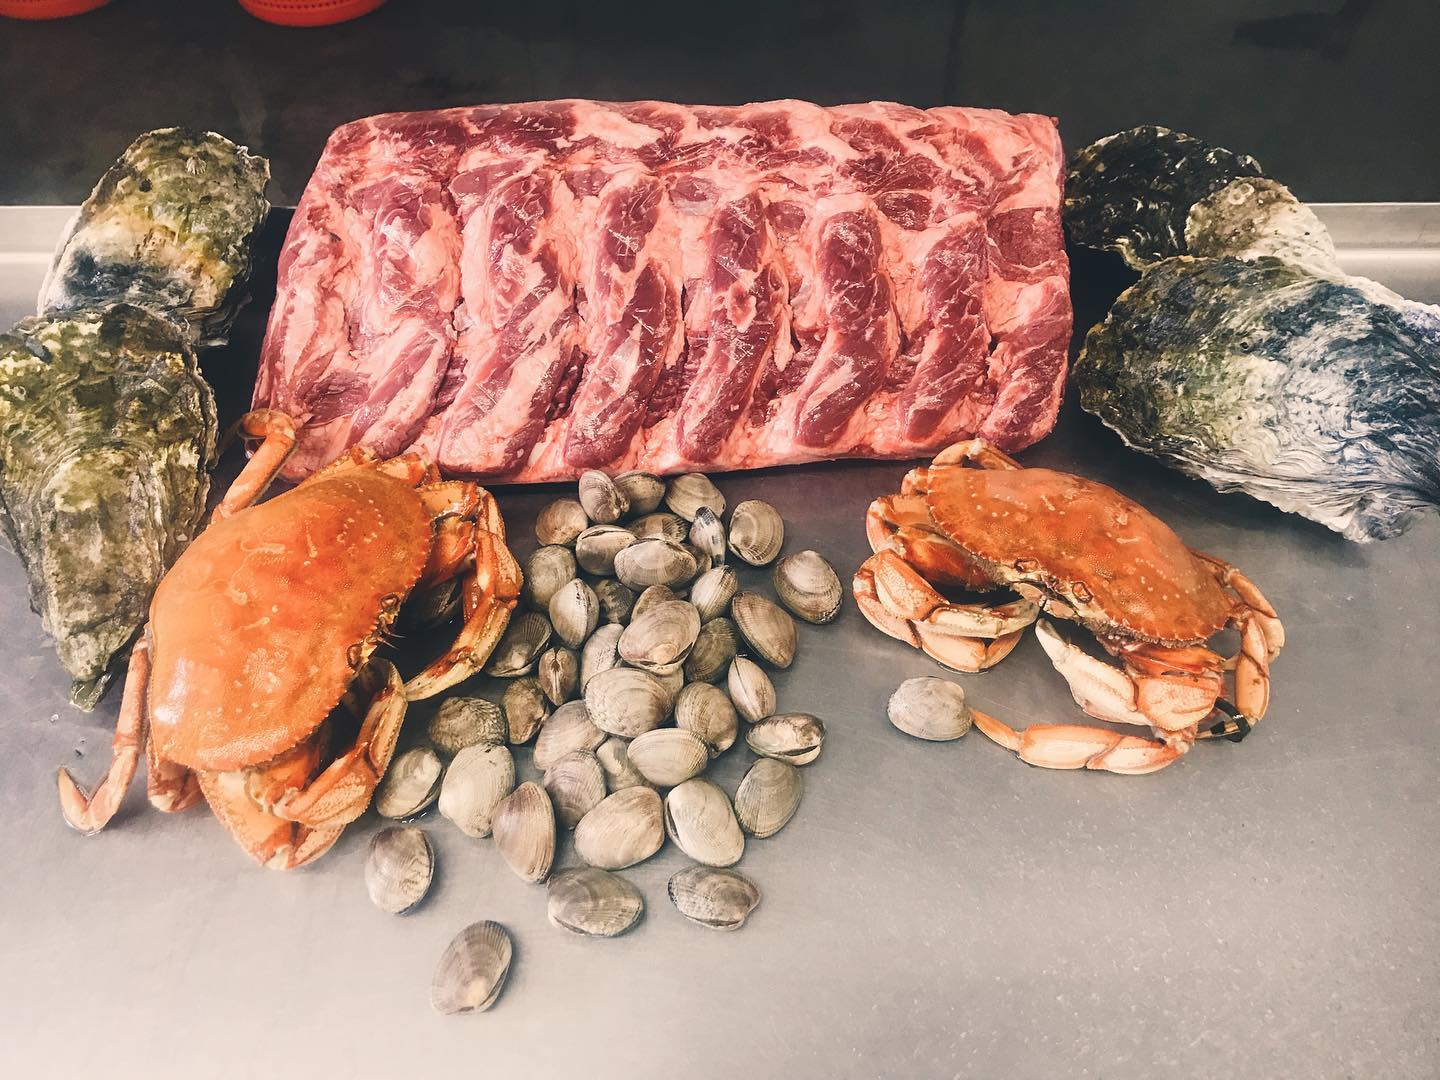 Fresh oysters, uncut beef ribs, fresh clams, and fresh dungeness crab.